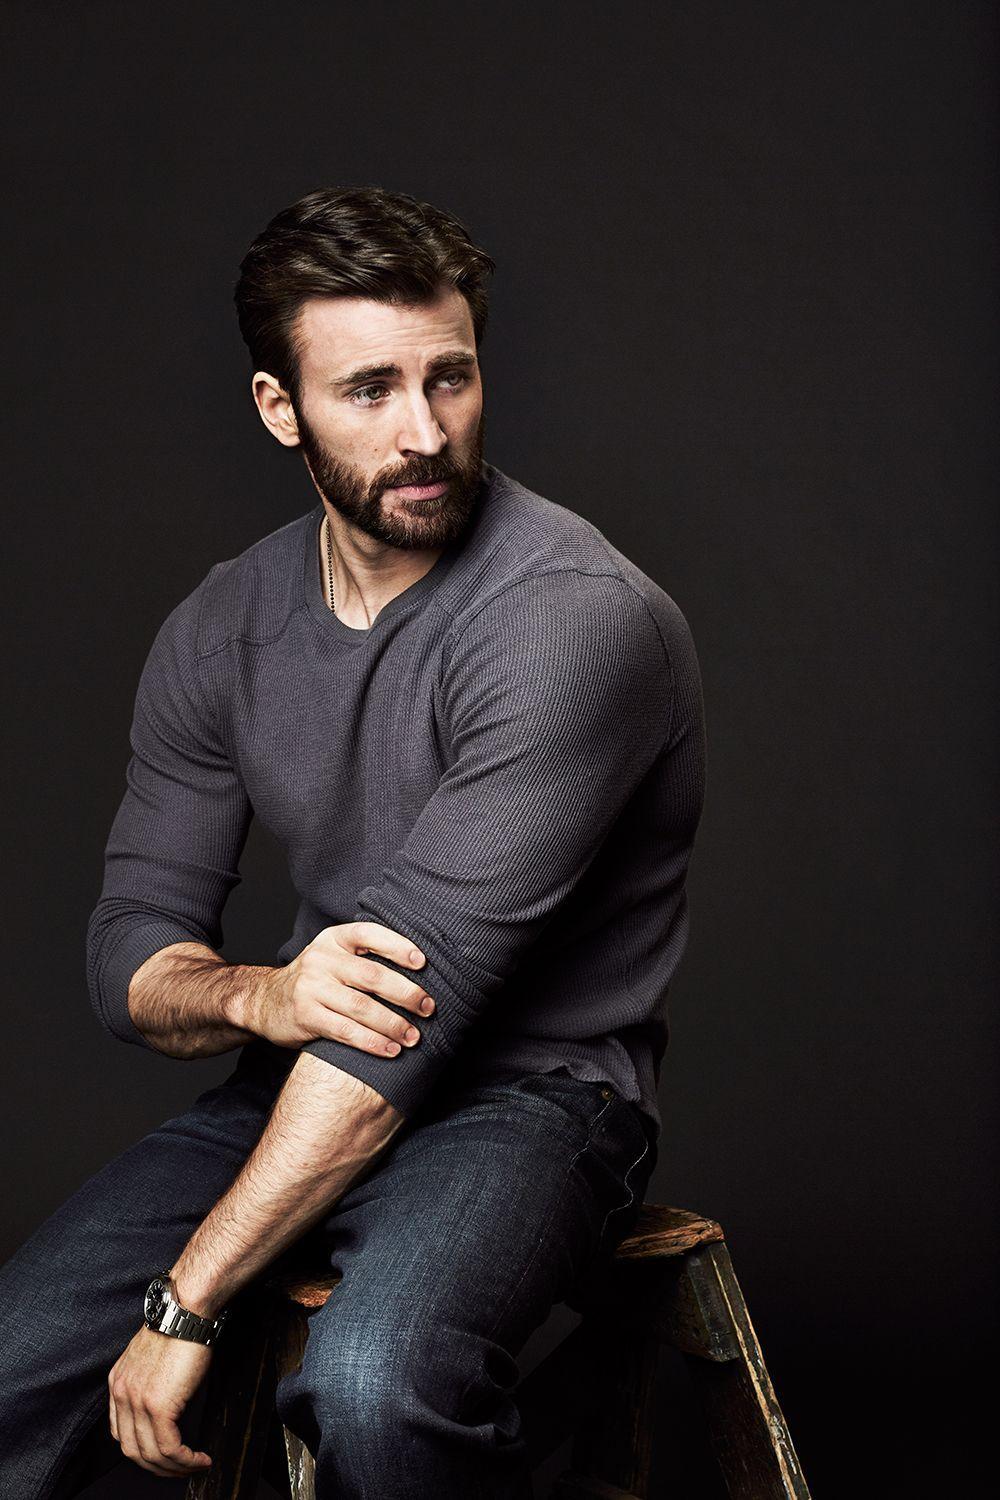 HD Chris Evans Wallpapers and Photos | HD Men Wallpapers